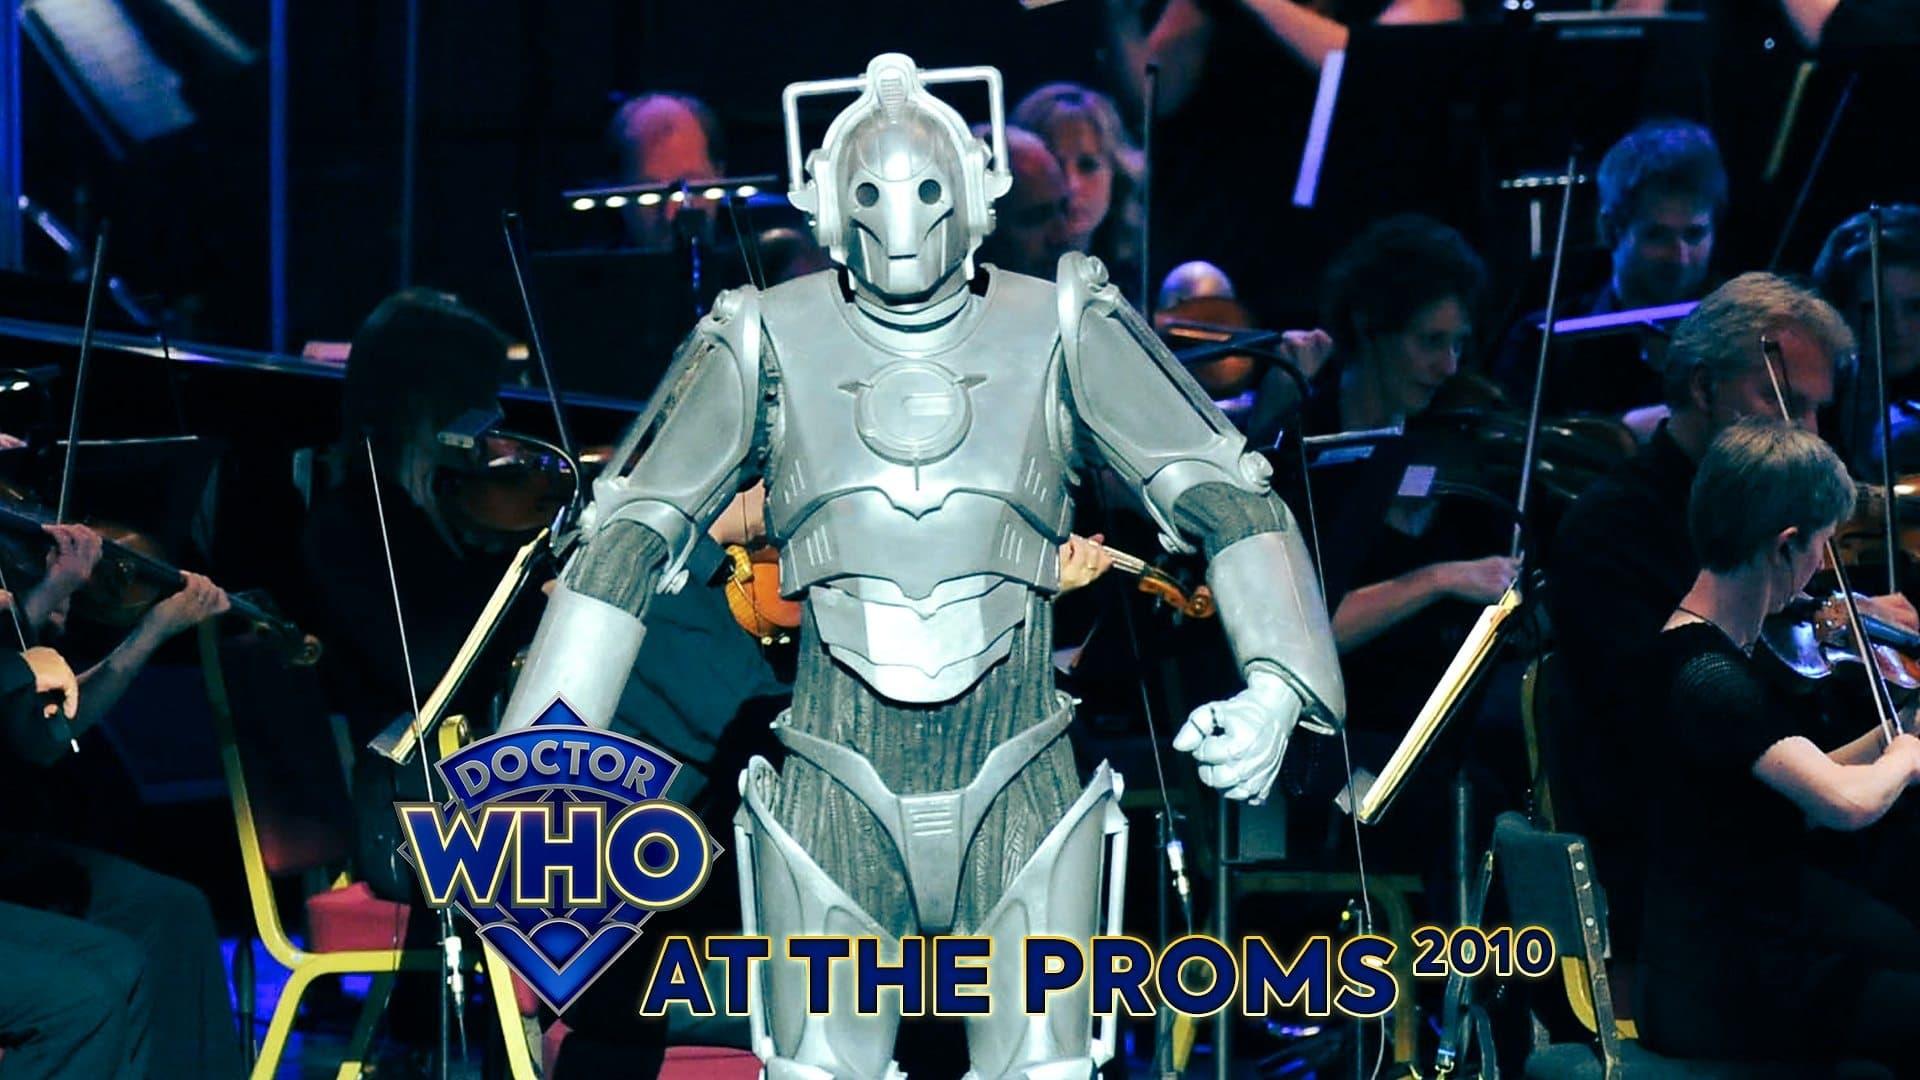 Doctor Who at the Proms backdrop